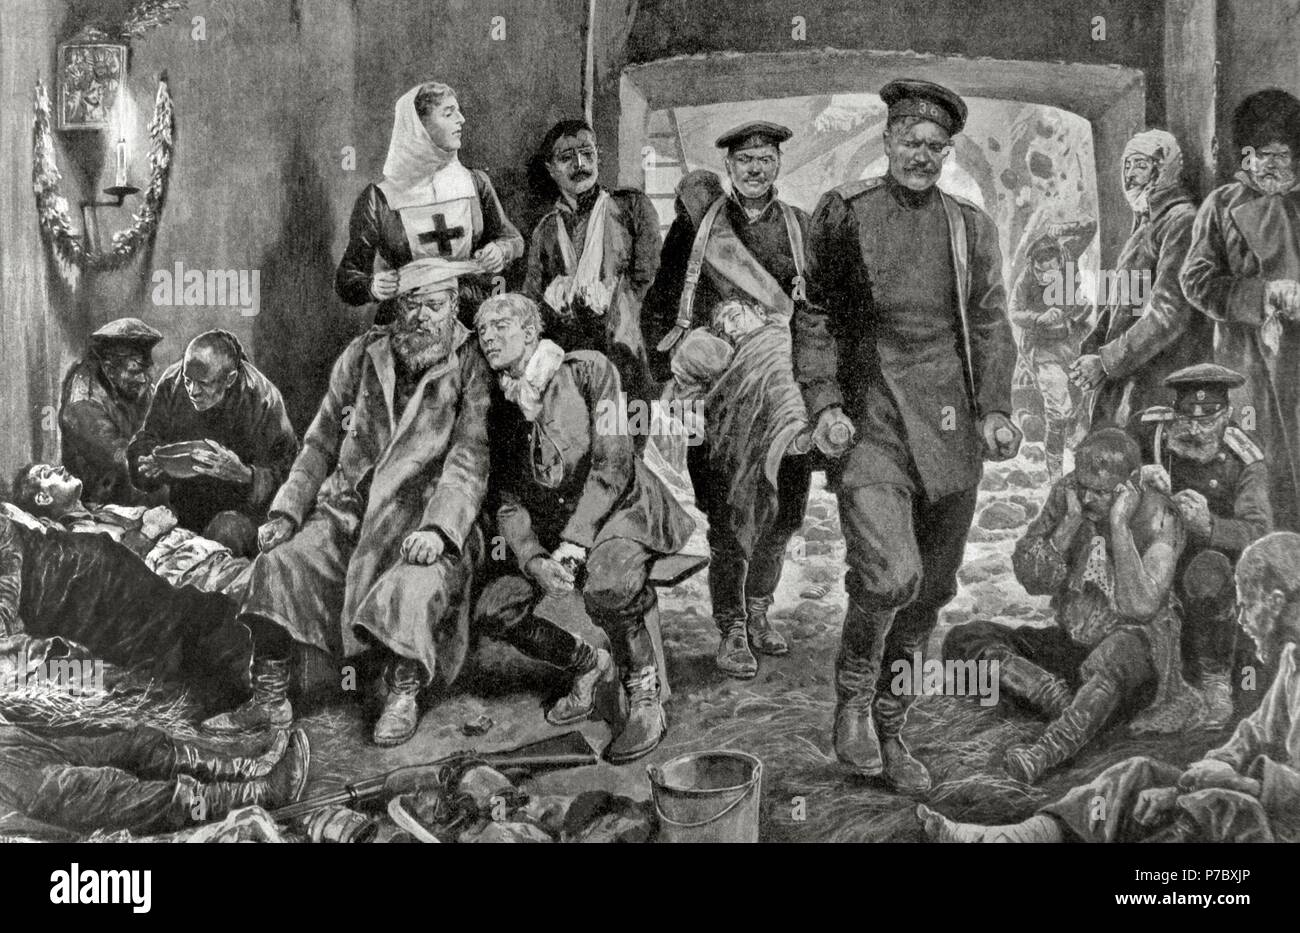 Russo-Japanese War (1904-1905). Campaign hospital of the Russian troops in Manchuria. Arrival of a wounded. Engraving by R. Caton Woodville. 'La Ilustracio n Artistica', 20th century. Stock Photo